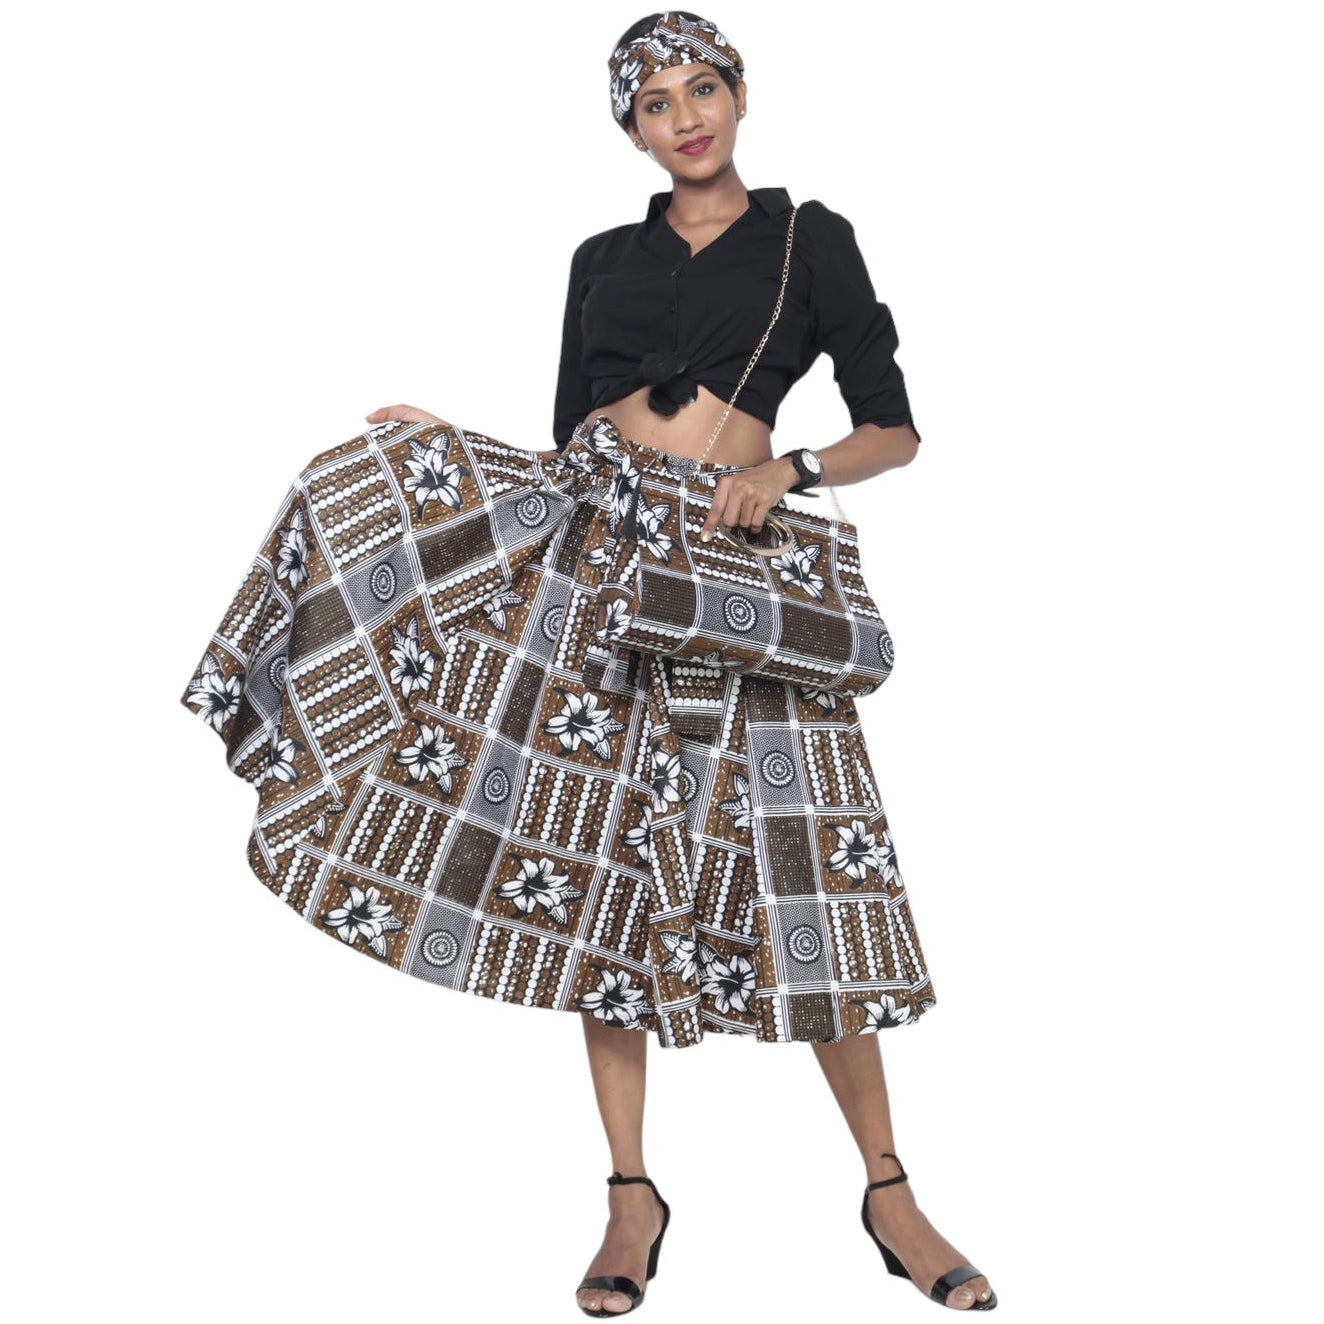 Women's African Print Midi Skirt with Tie Waist and Headwrap - Front